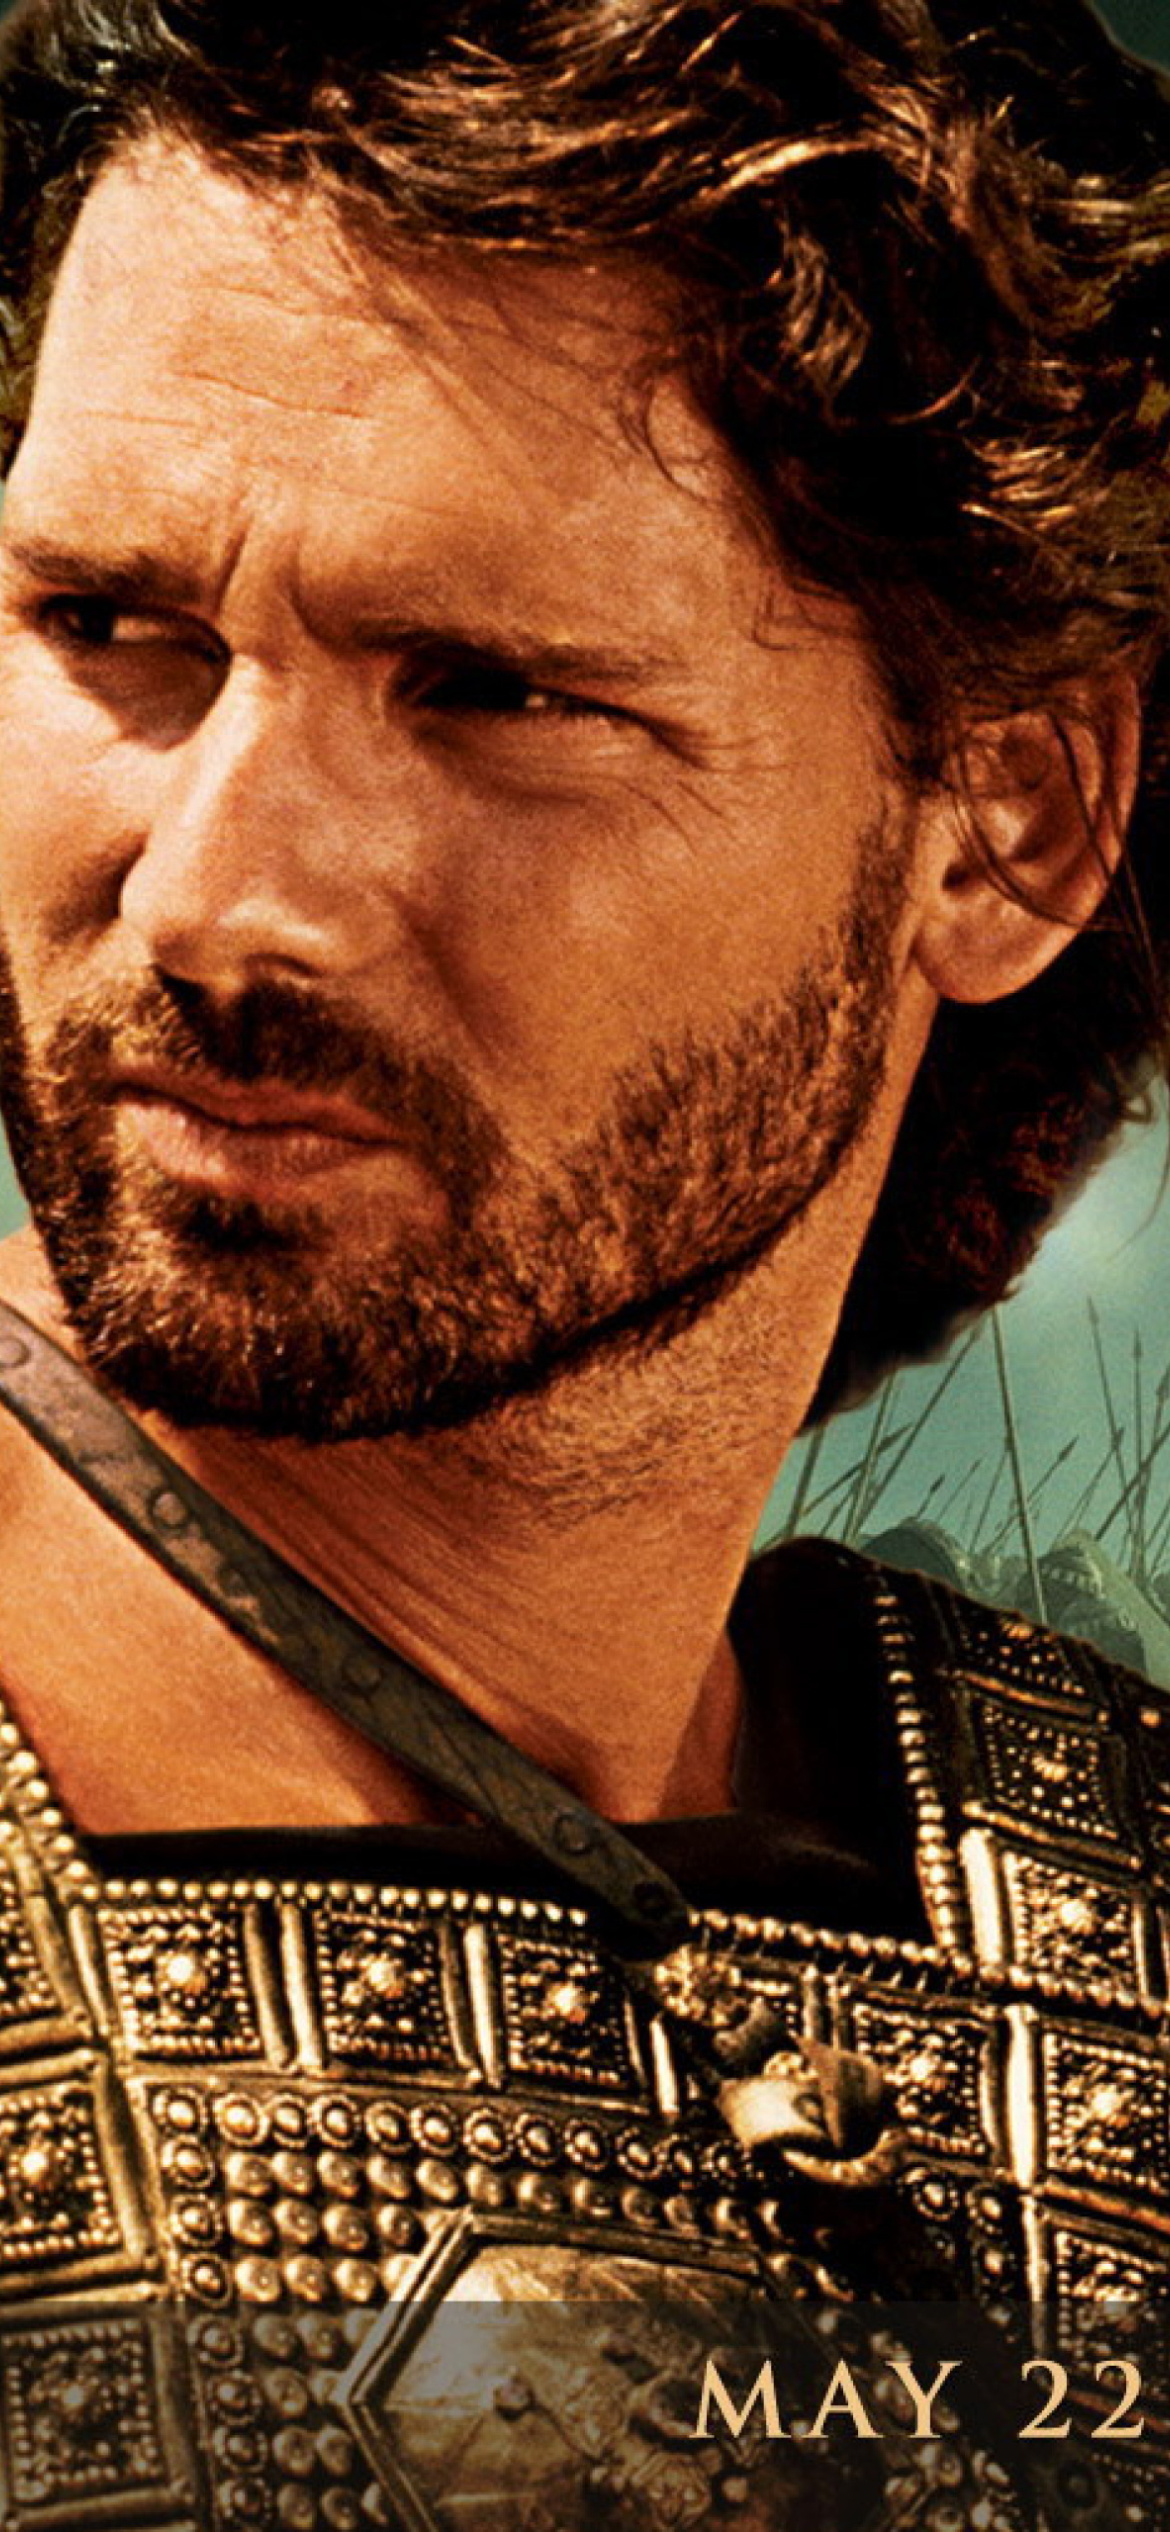 Eric Bana as Hector in Troy wallpaper 1170x2532